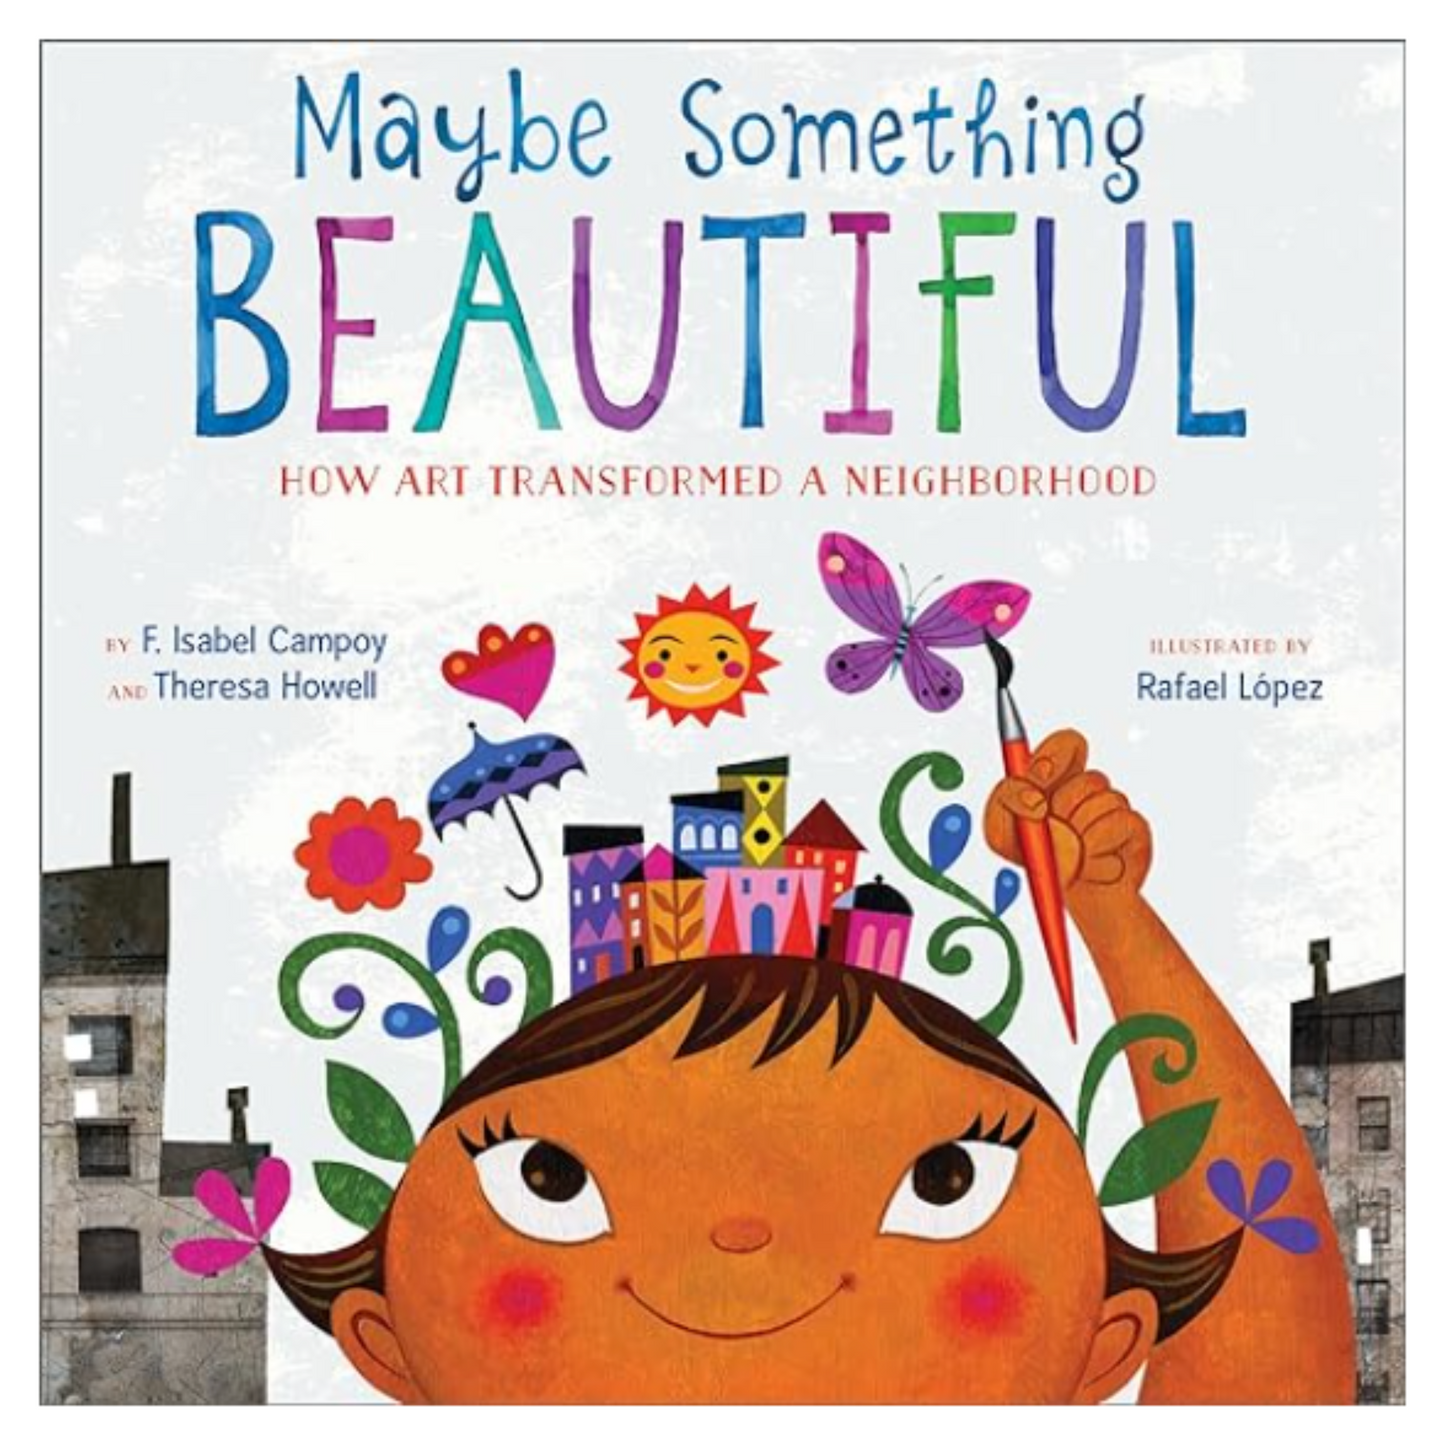 Maybe Something Beautiful: How Art Transformed a Neighborhood Hardcover Ð Picture Book, April 12, 2016 by F. Isabel Campoy (Author), Theresa Howell (Author), Rafael L—pez (Illustrator)